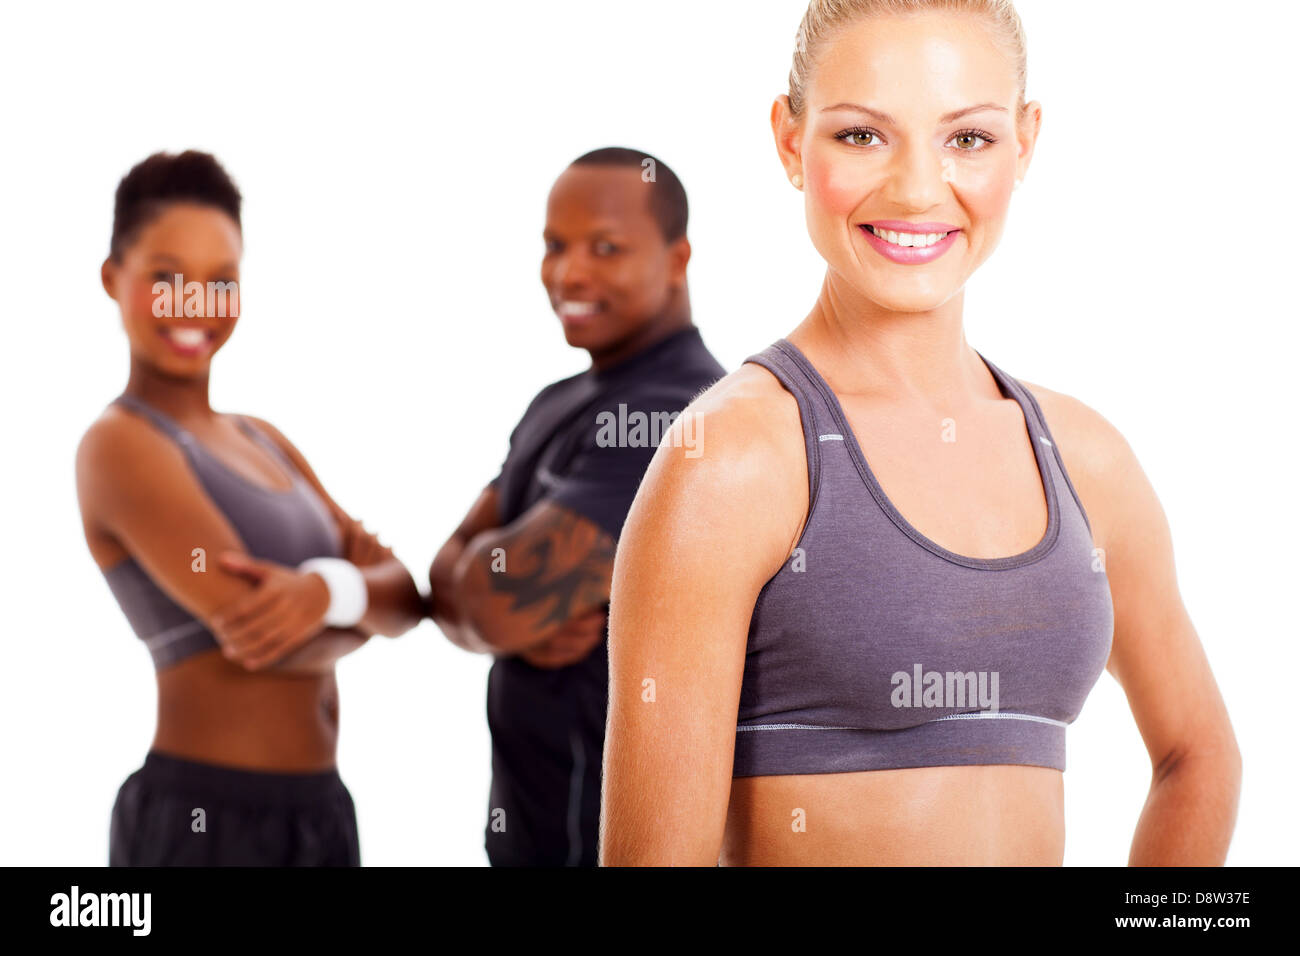 beautiful fit woman and two gym members on background Stock Photo